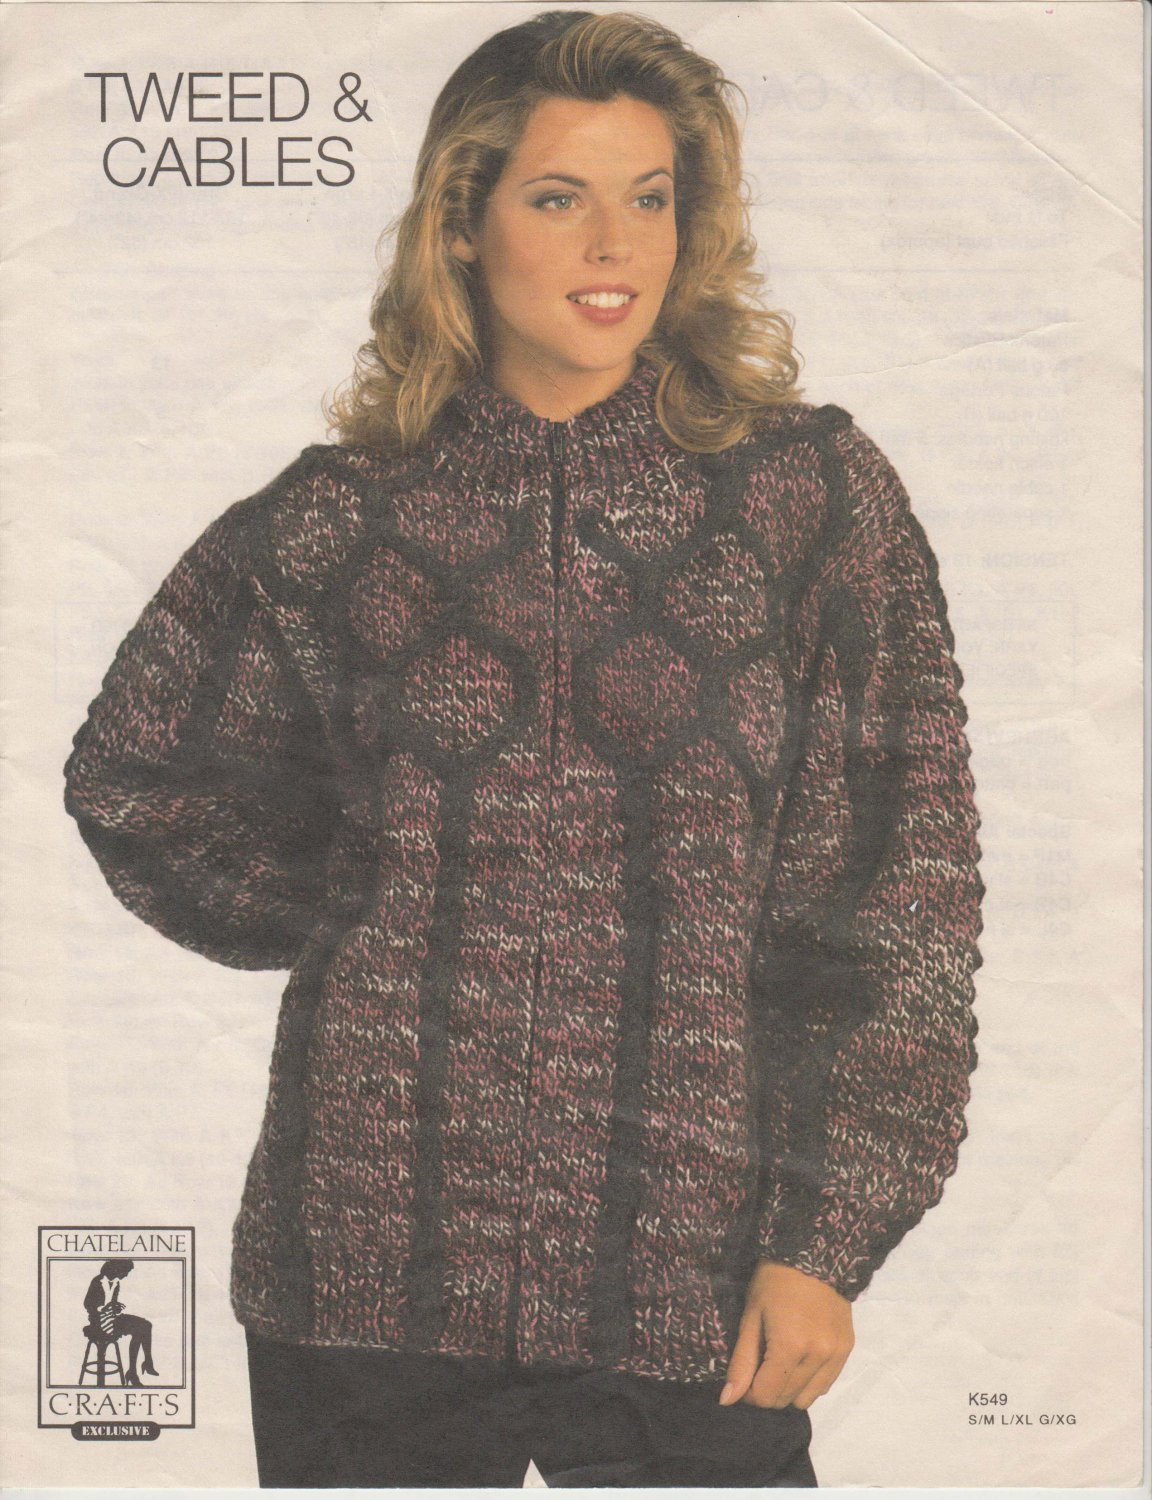 Tweed Knitting Patterns Chatelaine Crafts Knitting Pattern K549 Tweed Cables